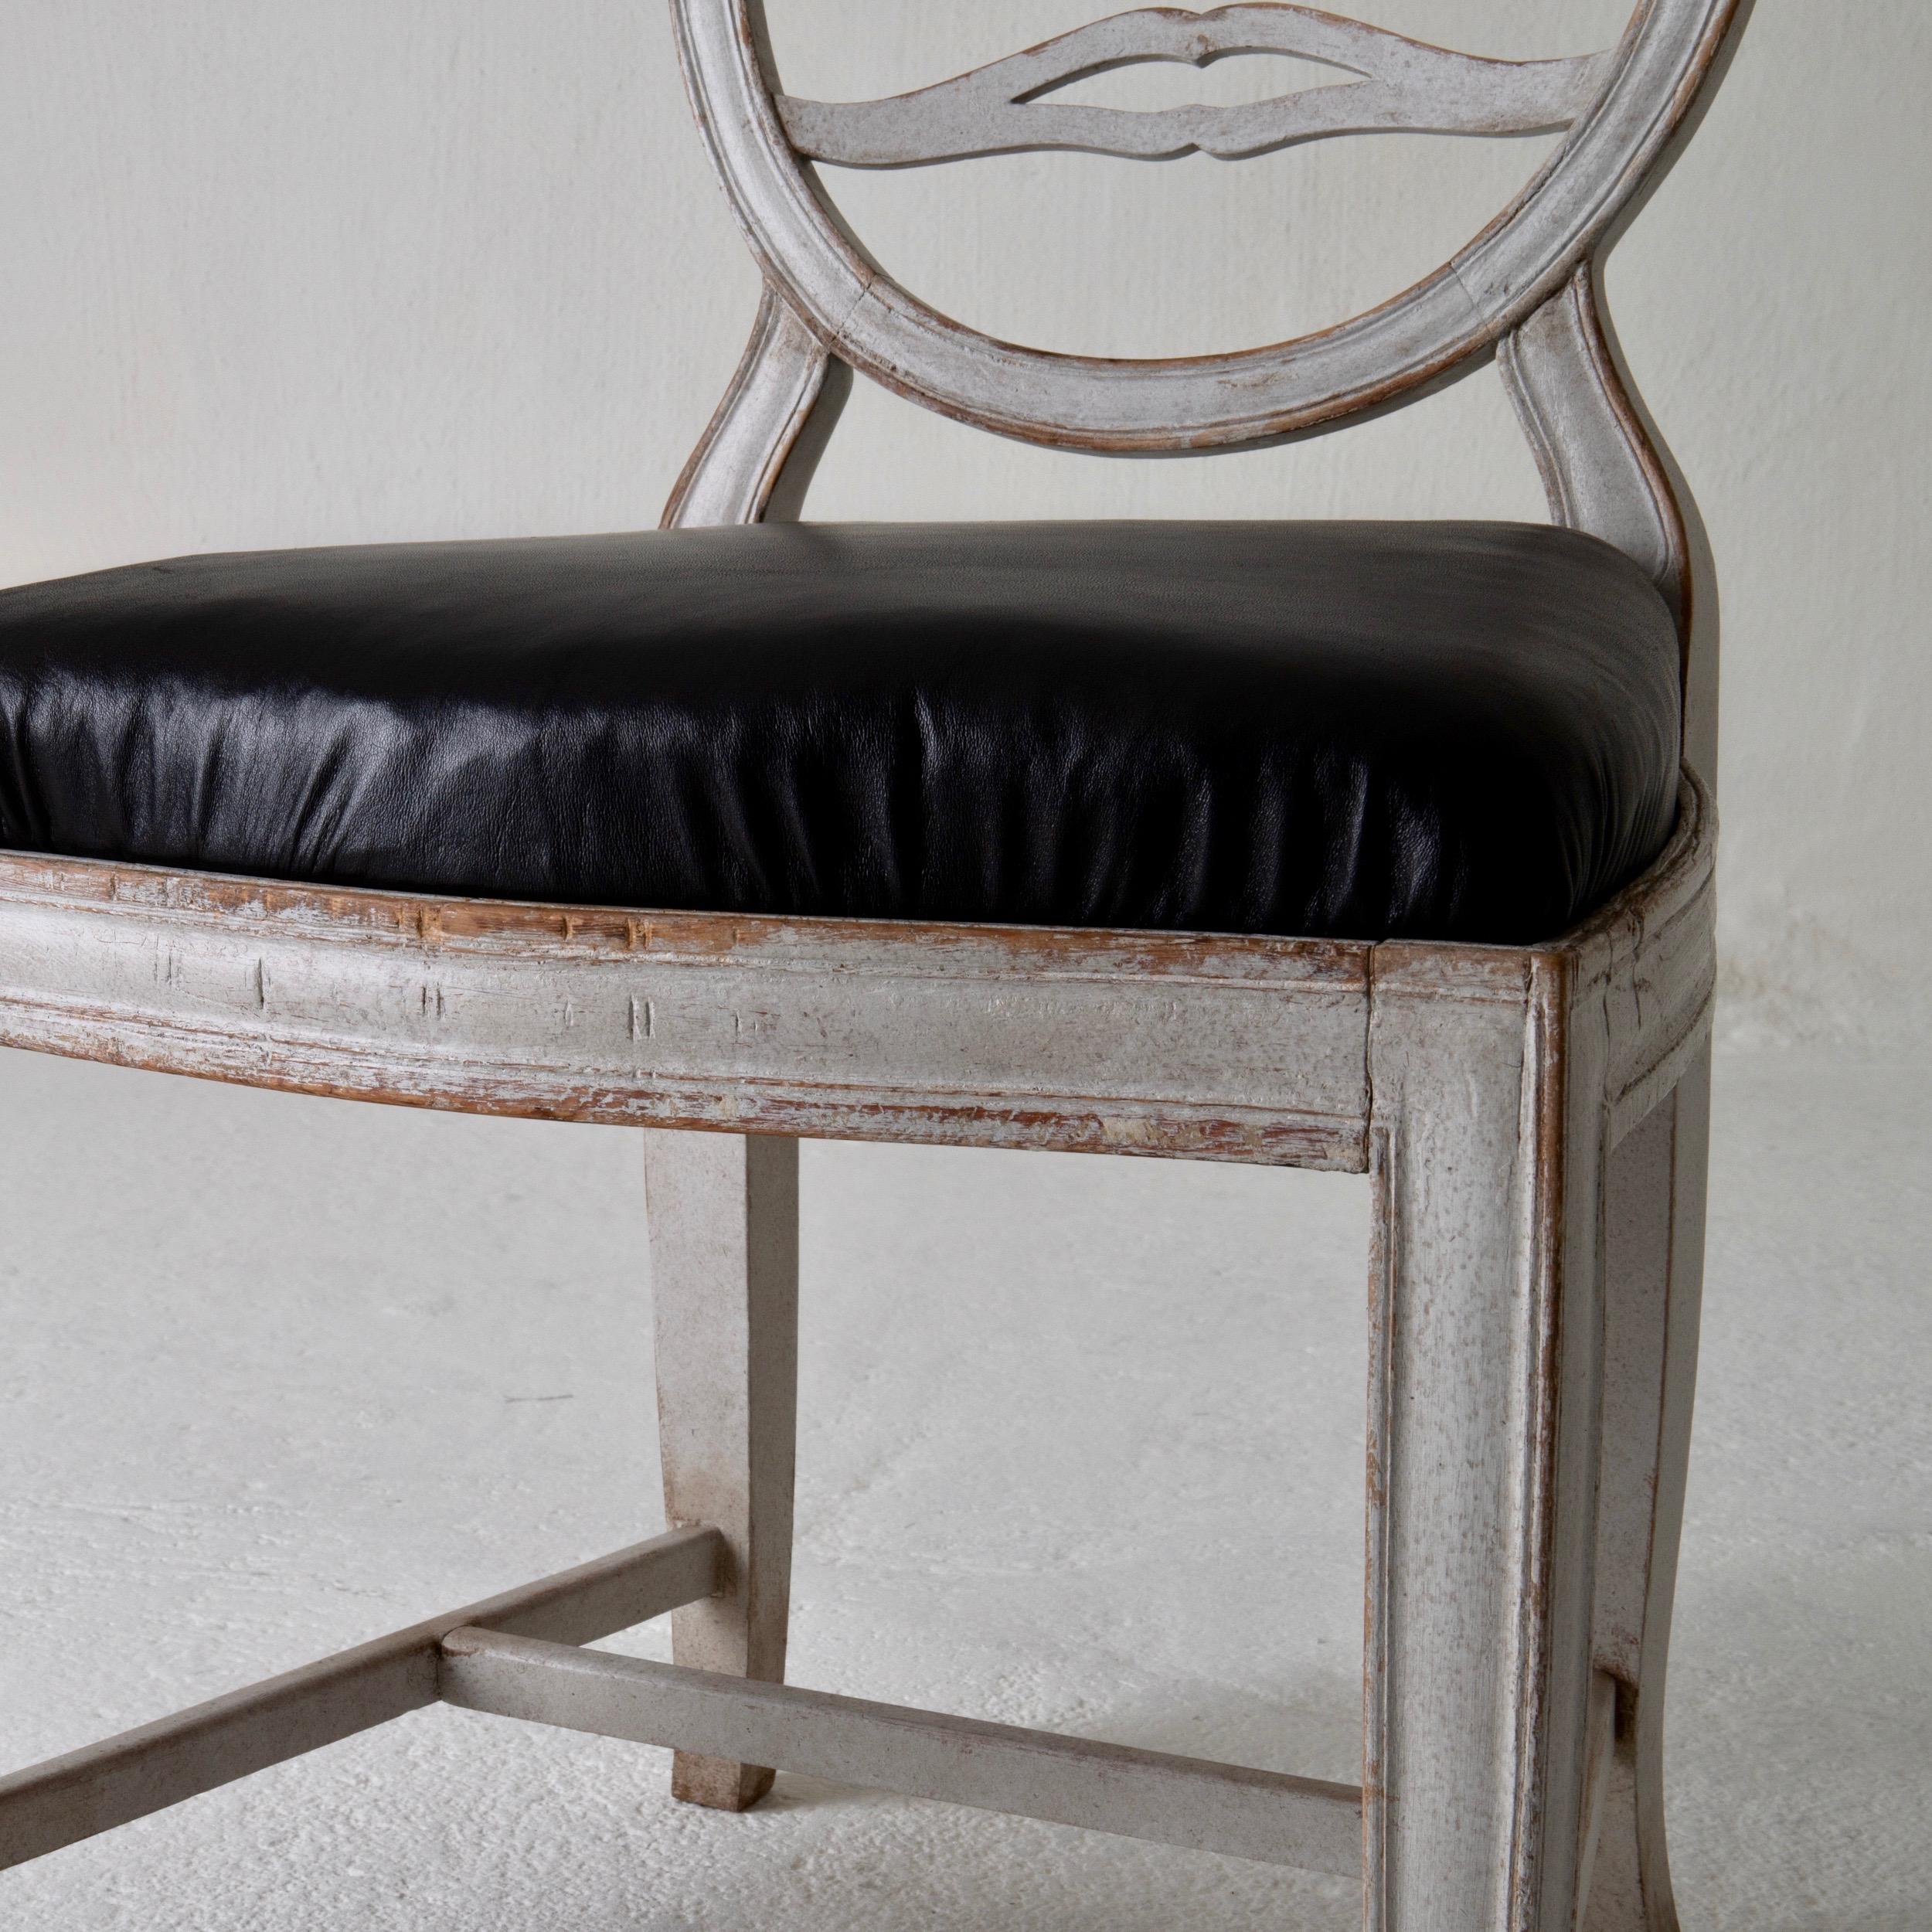 Chair Gustavian Swedish white black Sweden. A side chair made during the Gustavian period in Sweden 1790-1810. Beautiful carvings on the oval back. Square and tapered legs. Loose seat upholstered in a soft black leather.